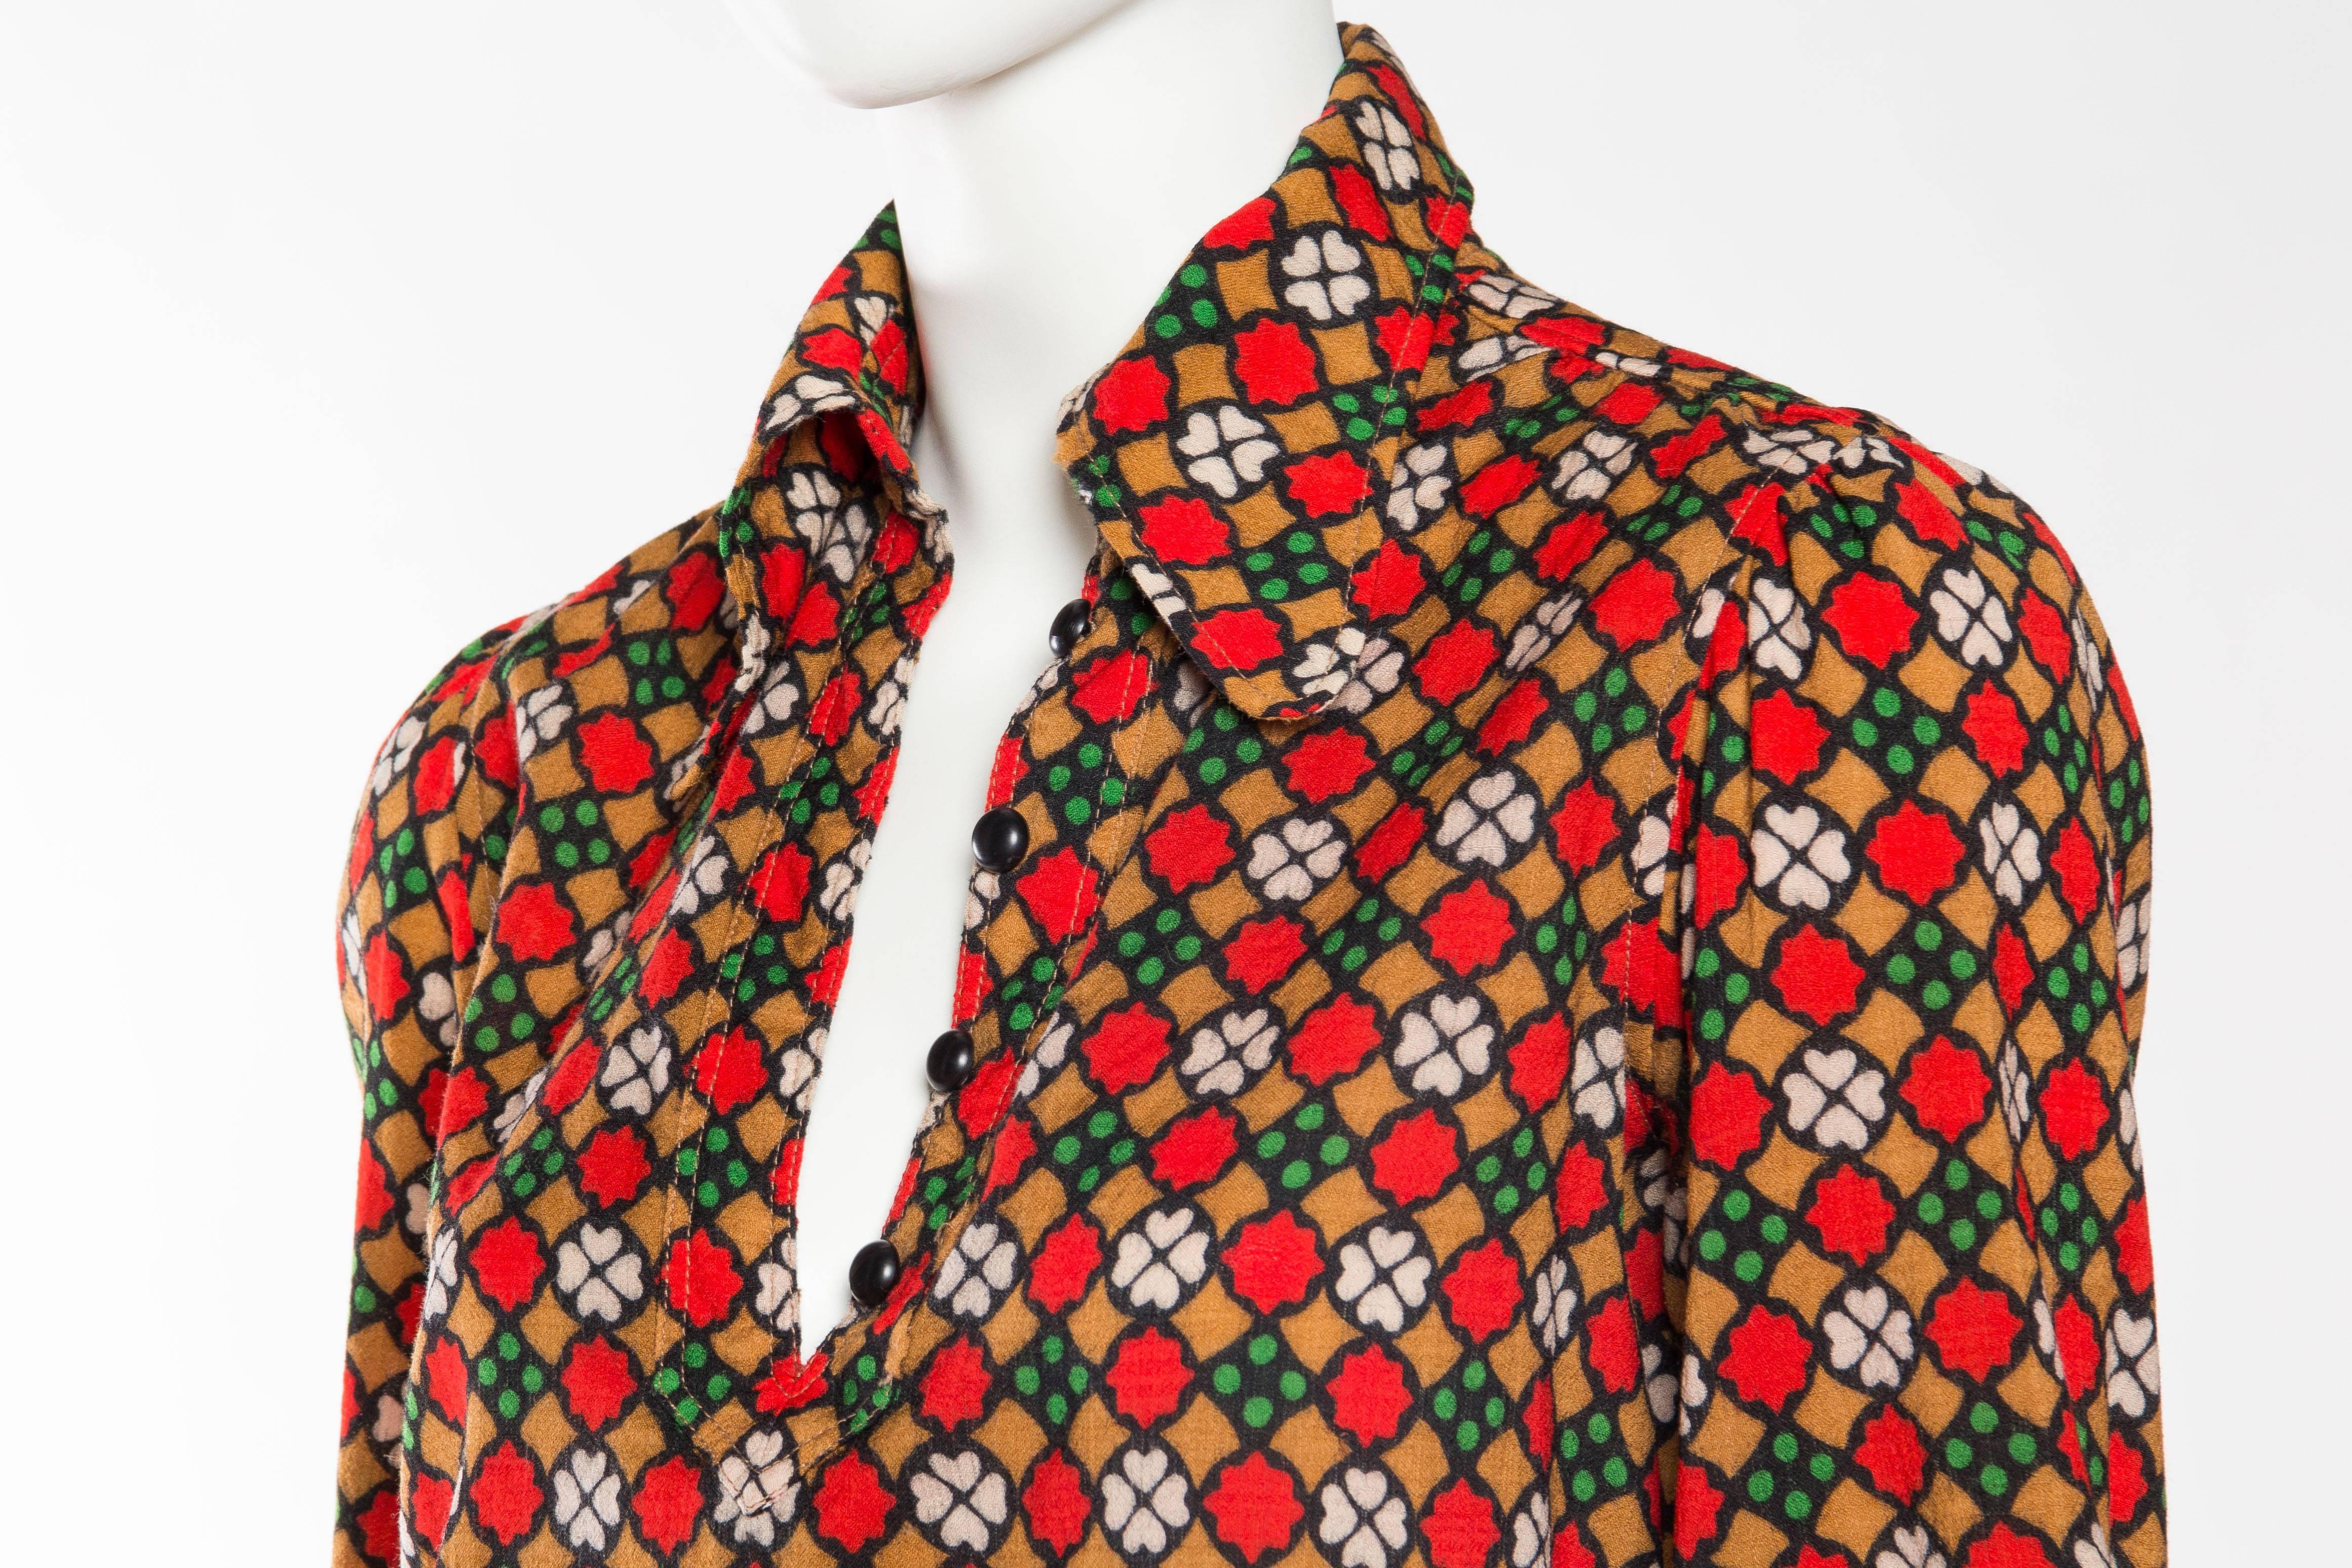 Iconic Documented Yves Saint Laurent Printed Blouse 2